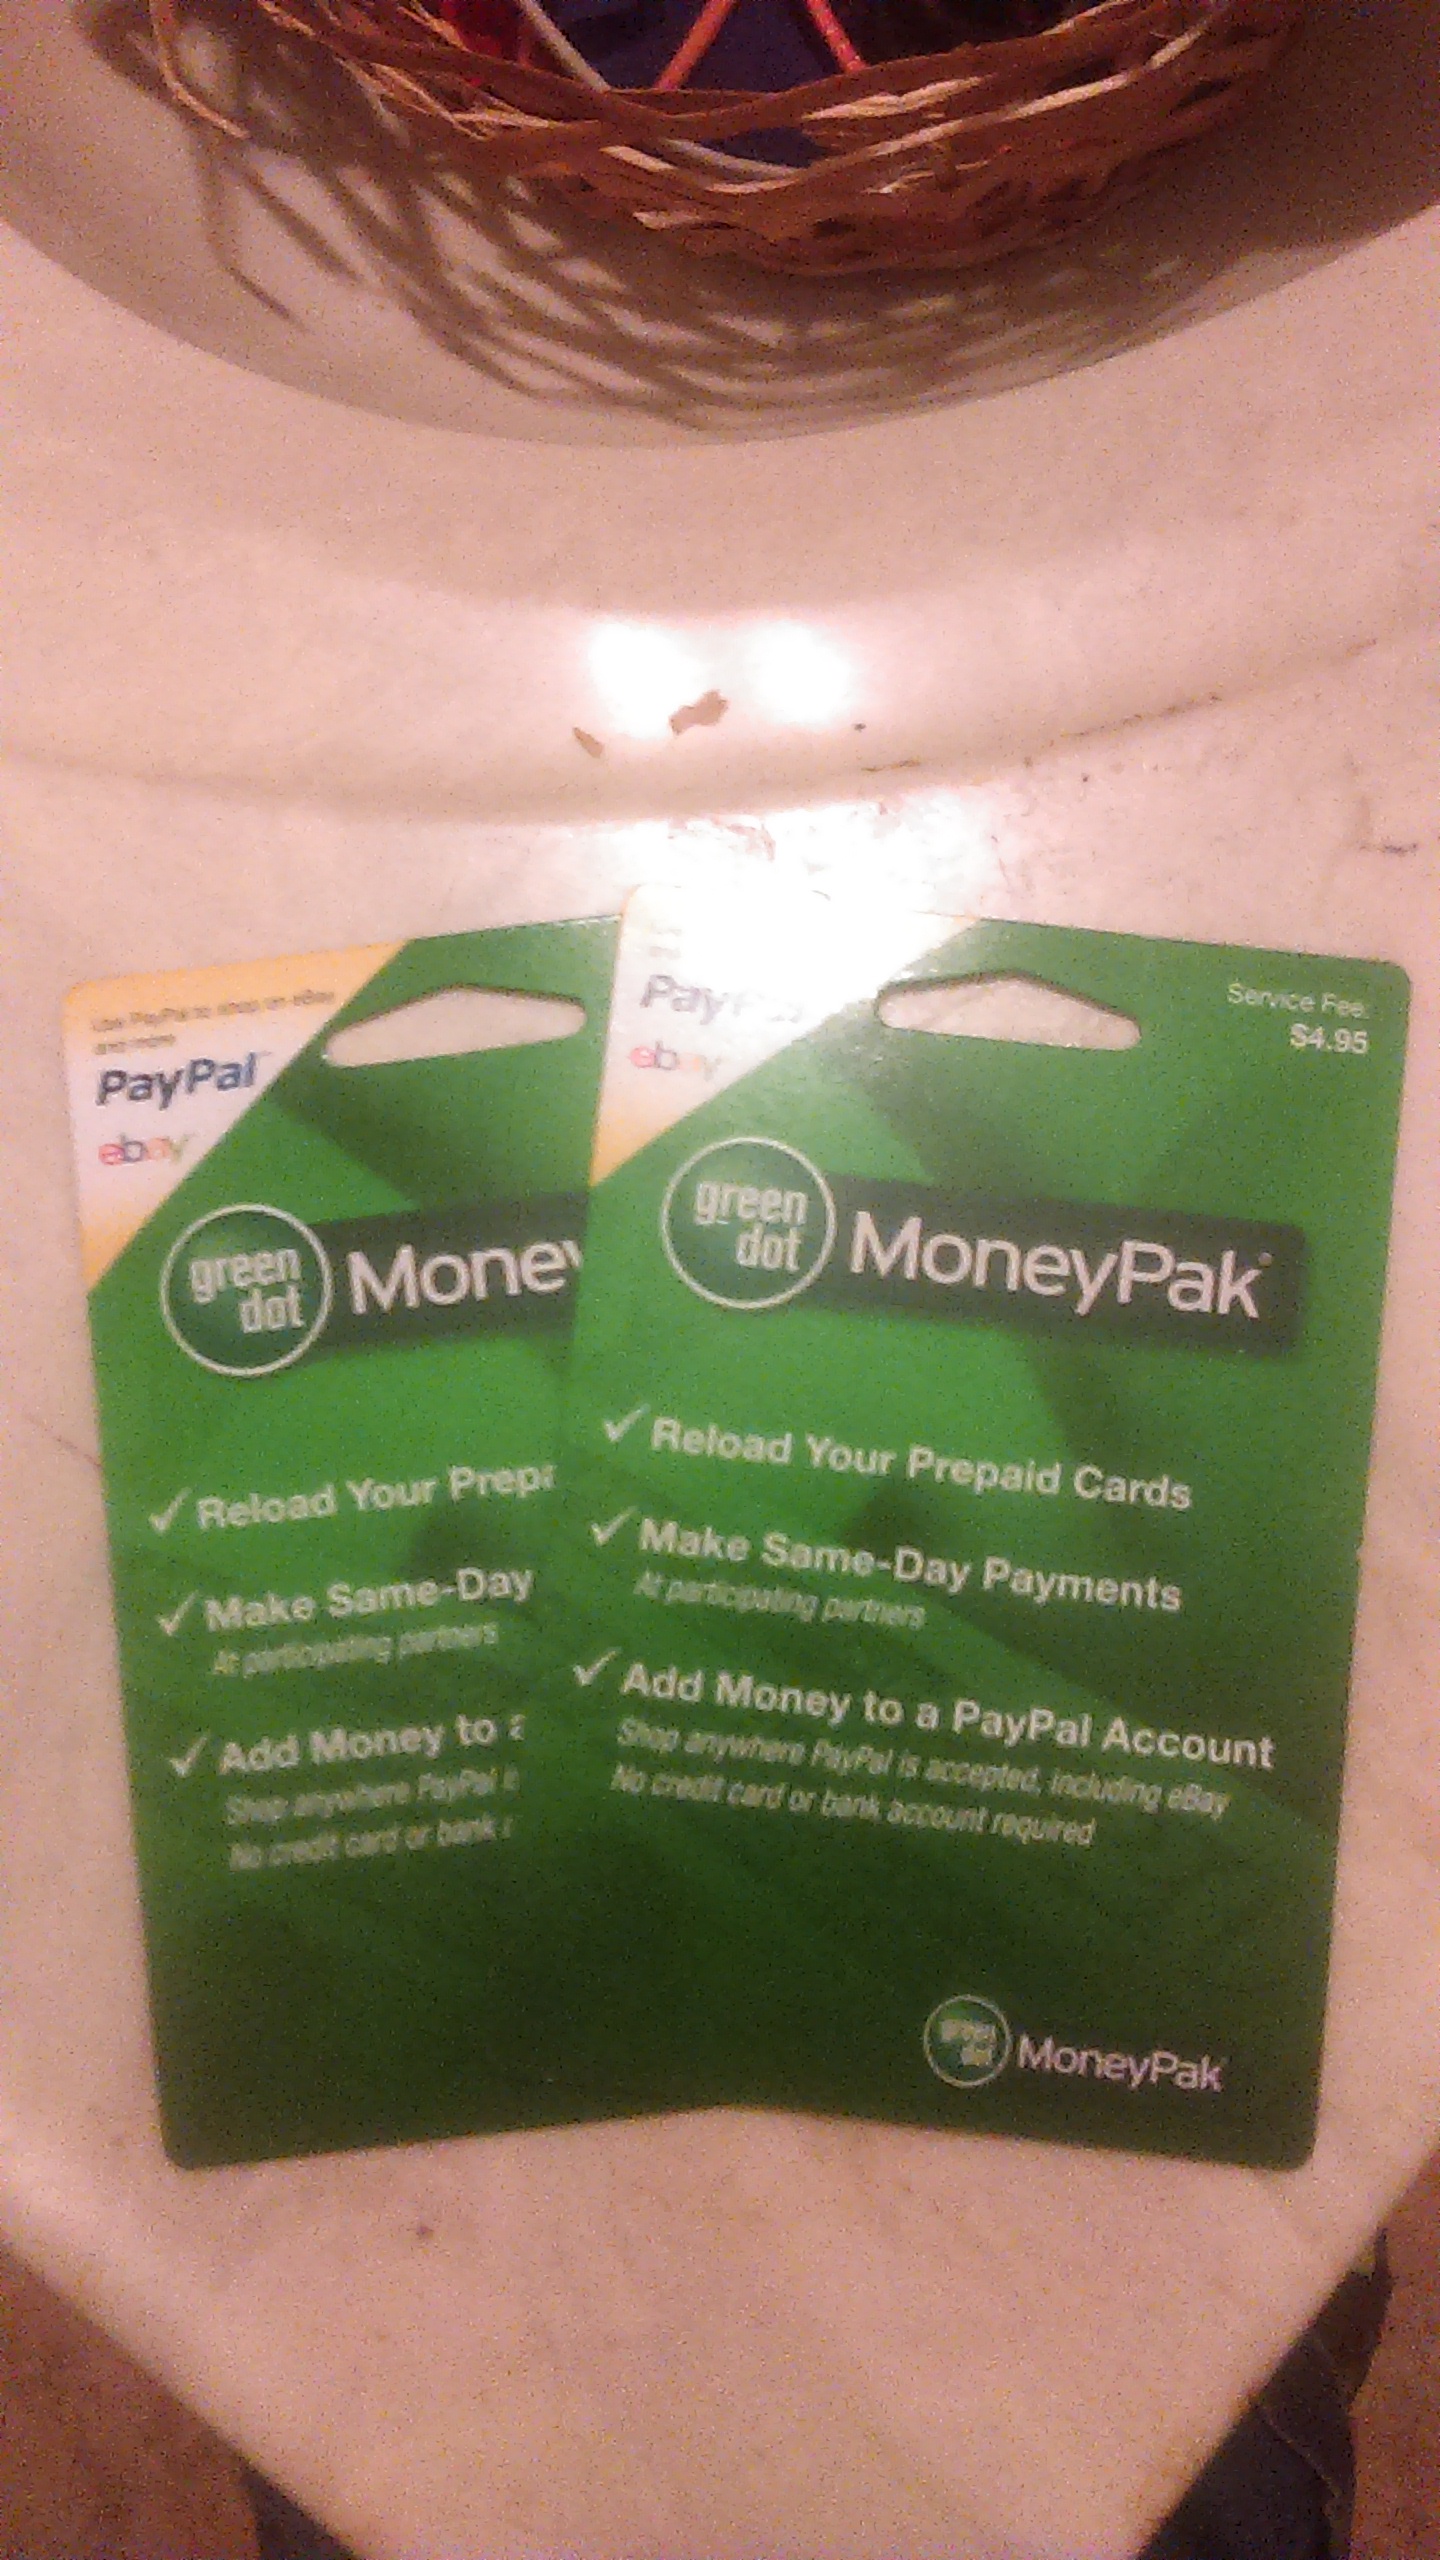 Both of the green dot cards I put money on